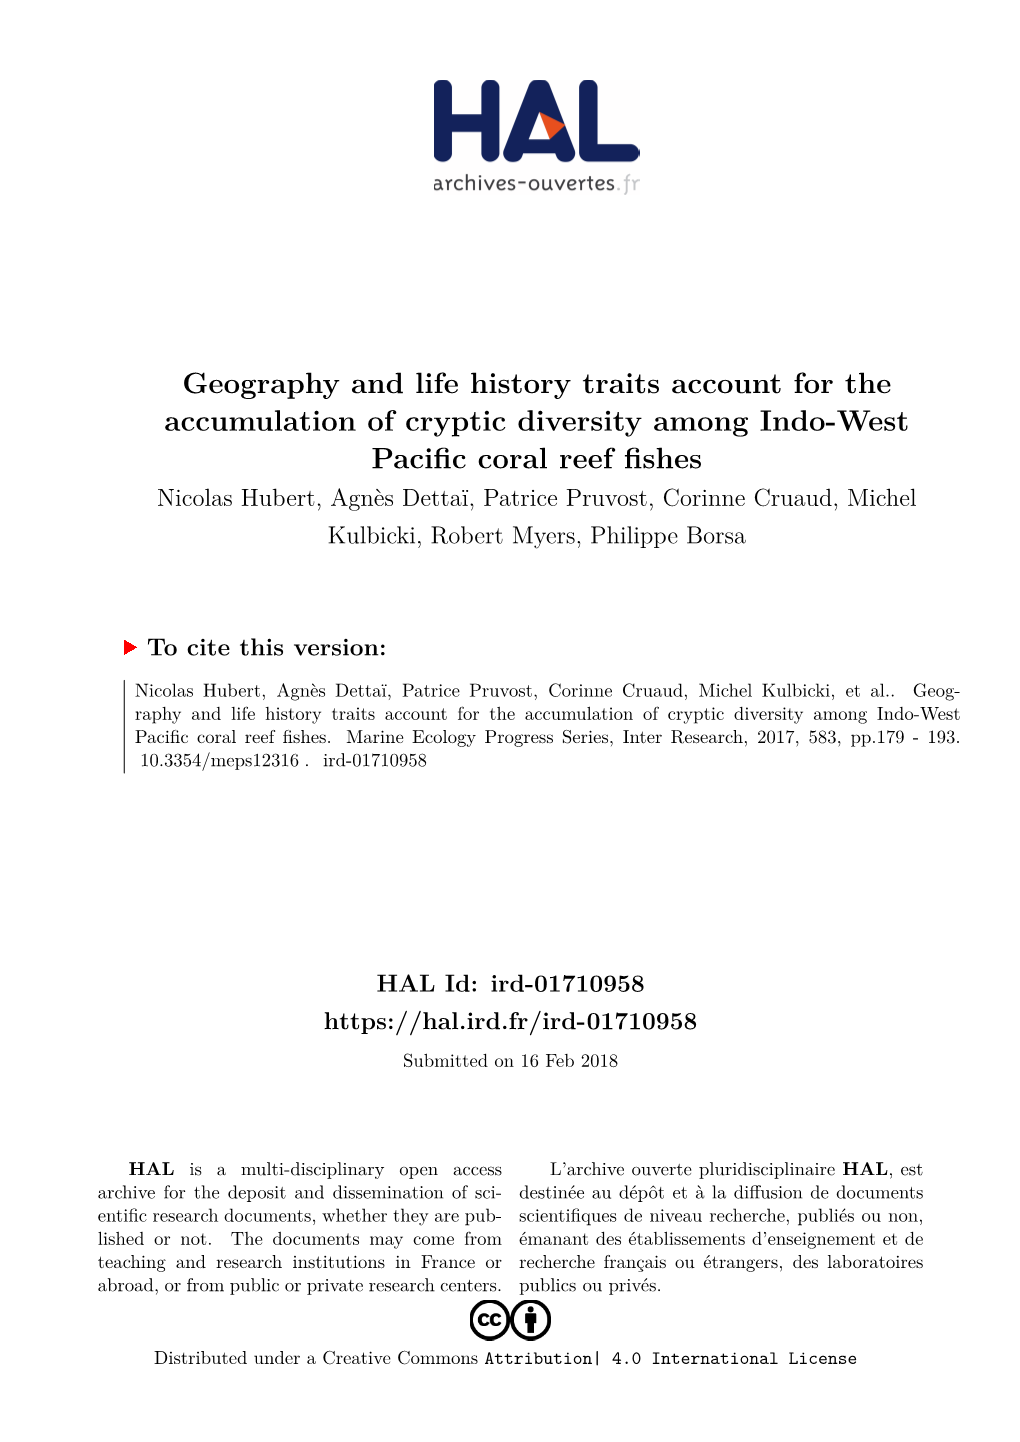 Geography and Life History Traits Account for the Accumulation Of